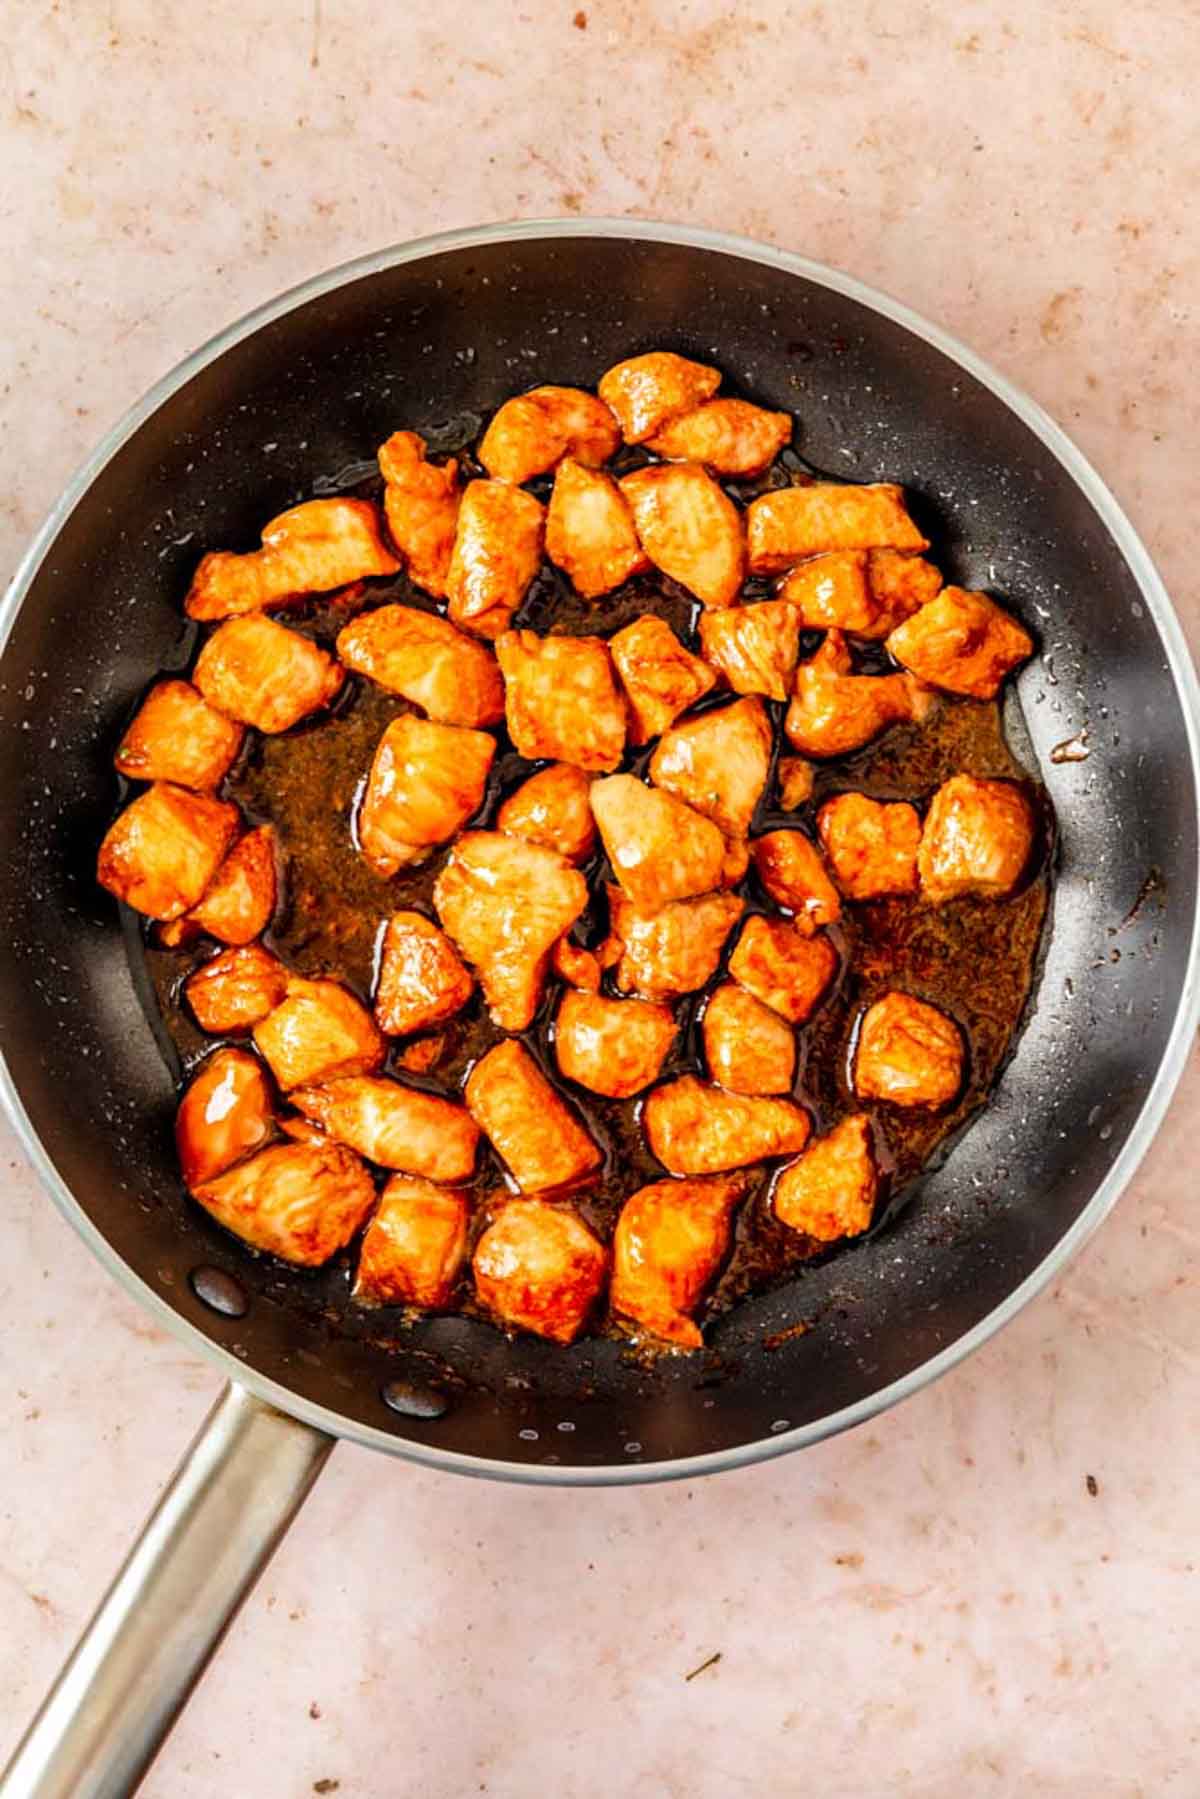 Pieces of chicken cooking in a pan with teriyaki sauce.